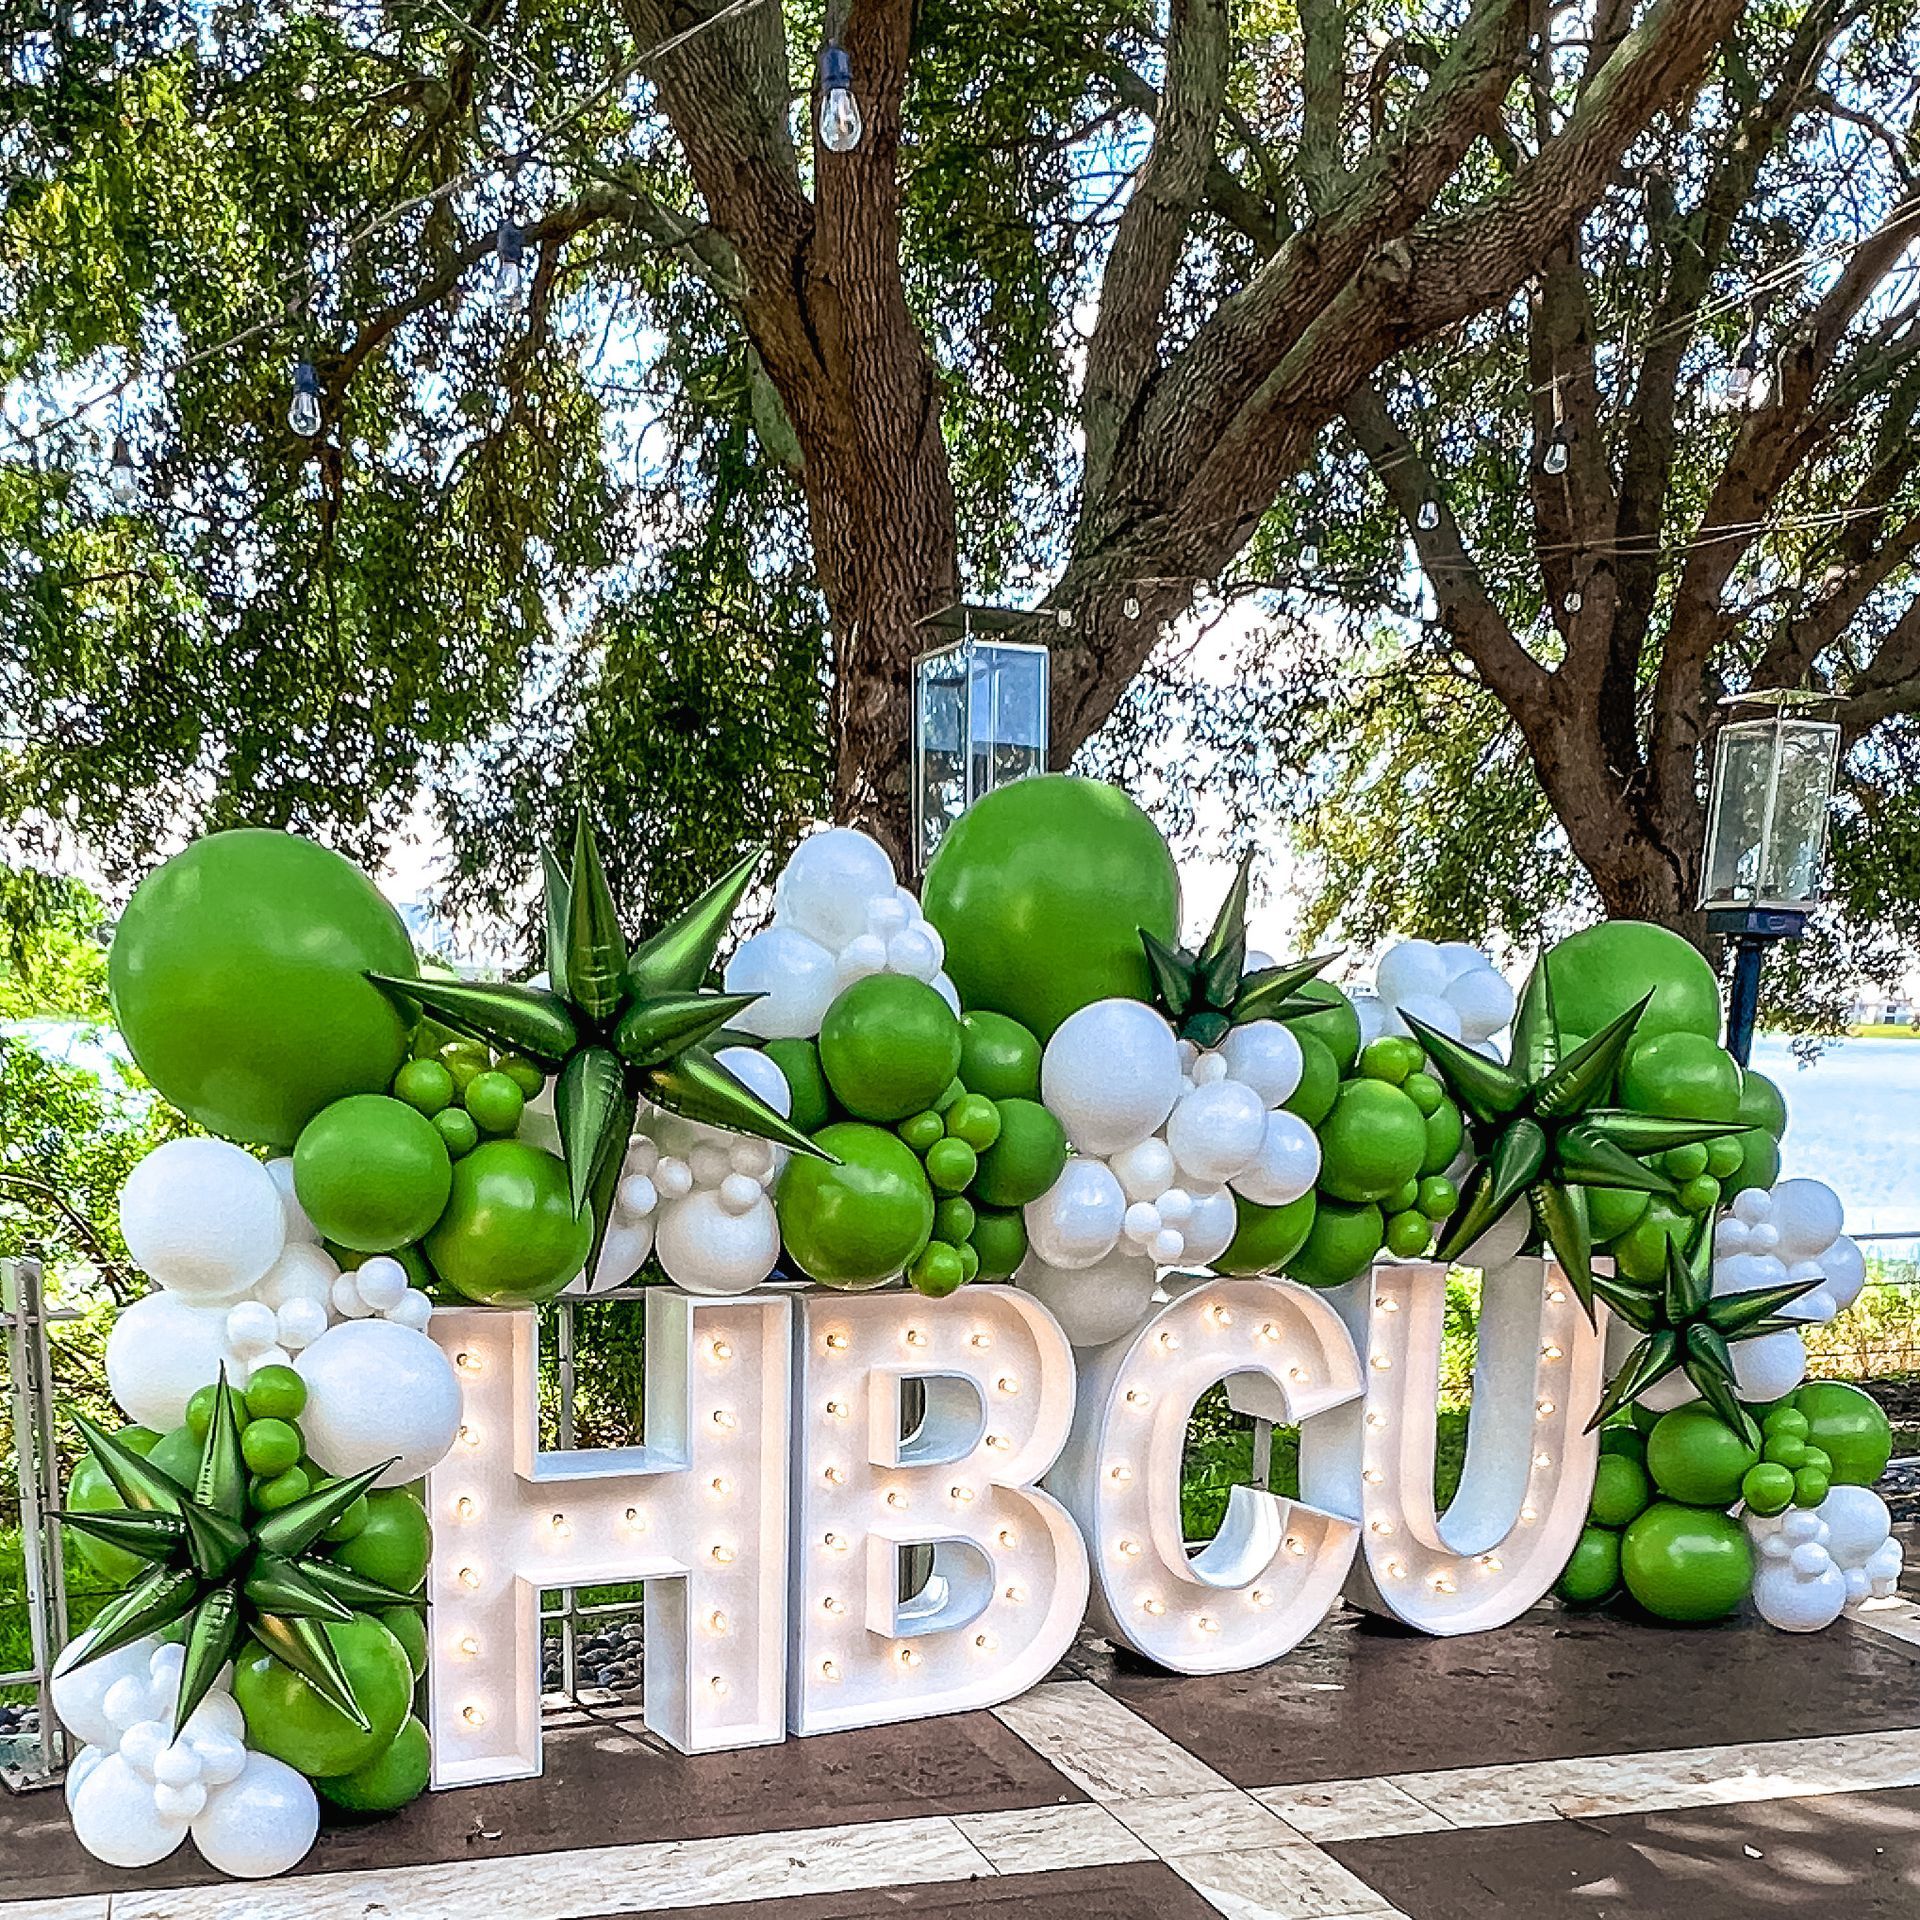 A sign that says hbcu is surrounded by green and white balloons.